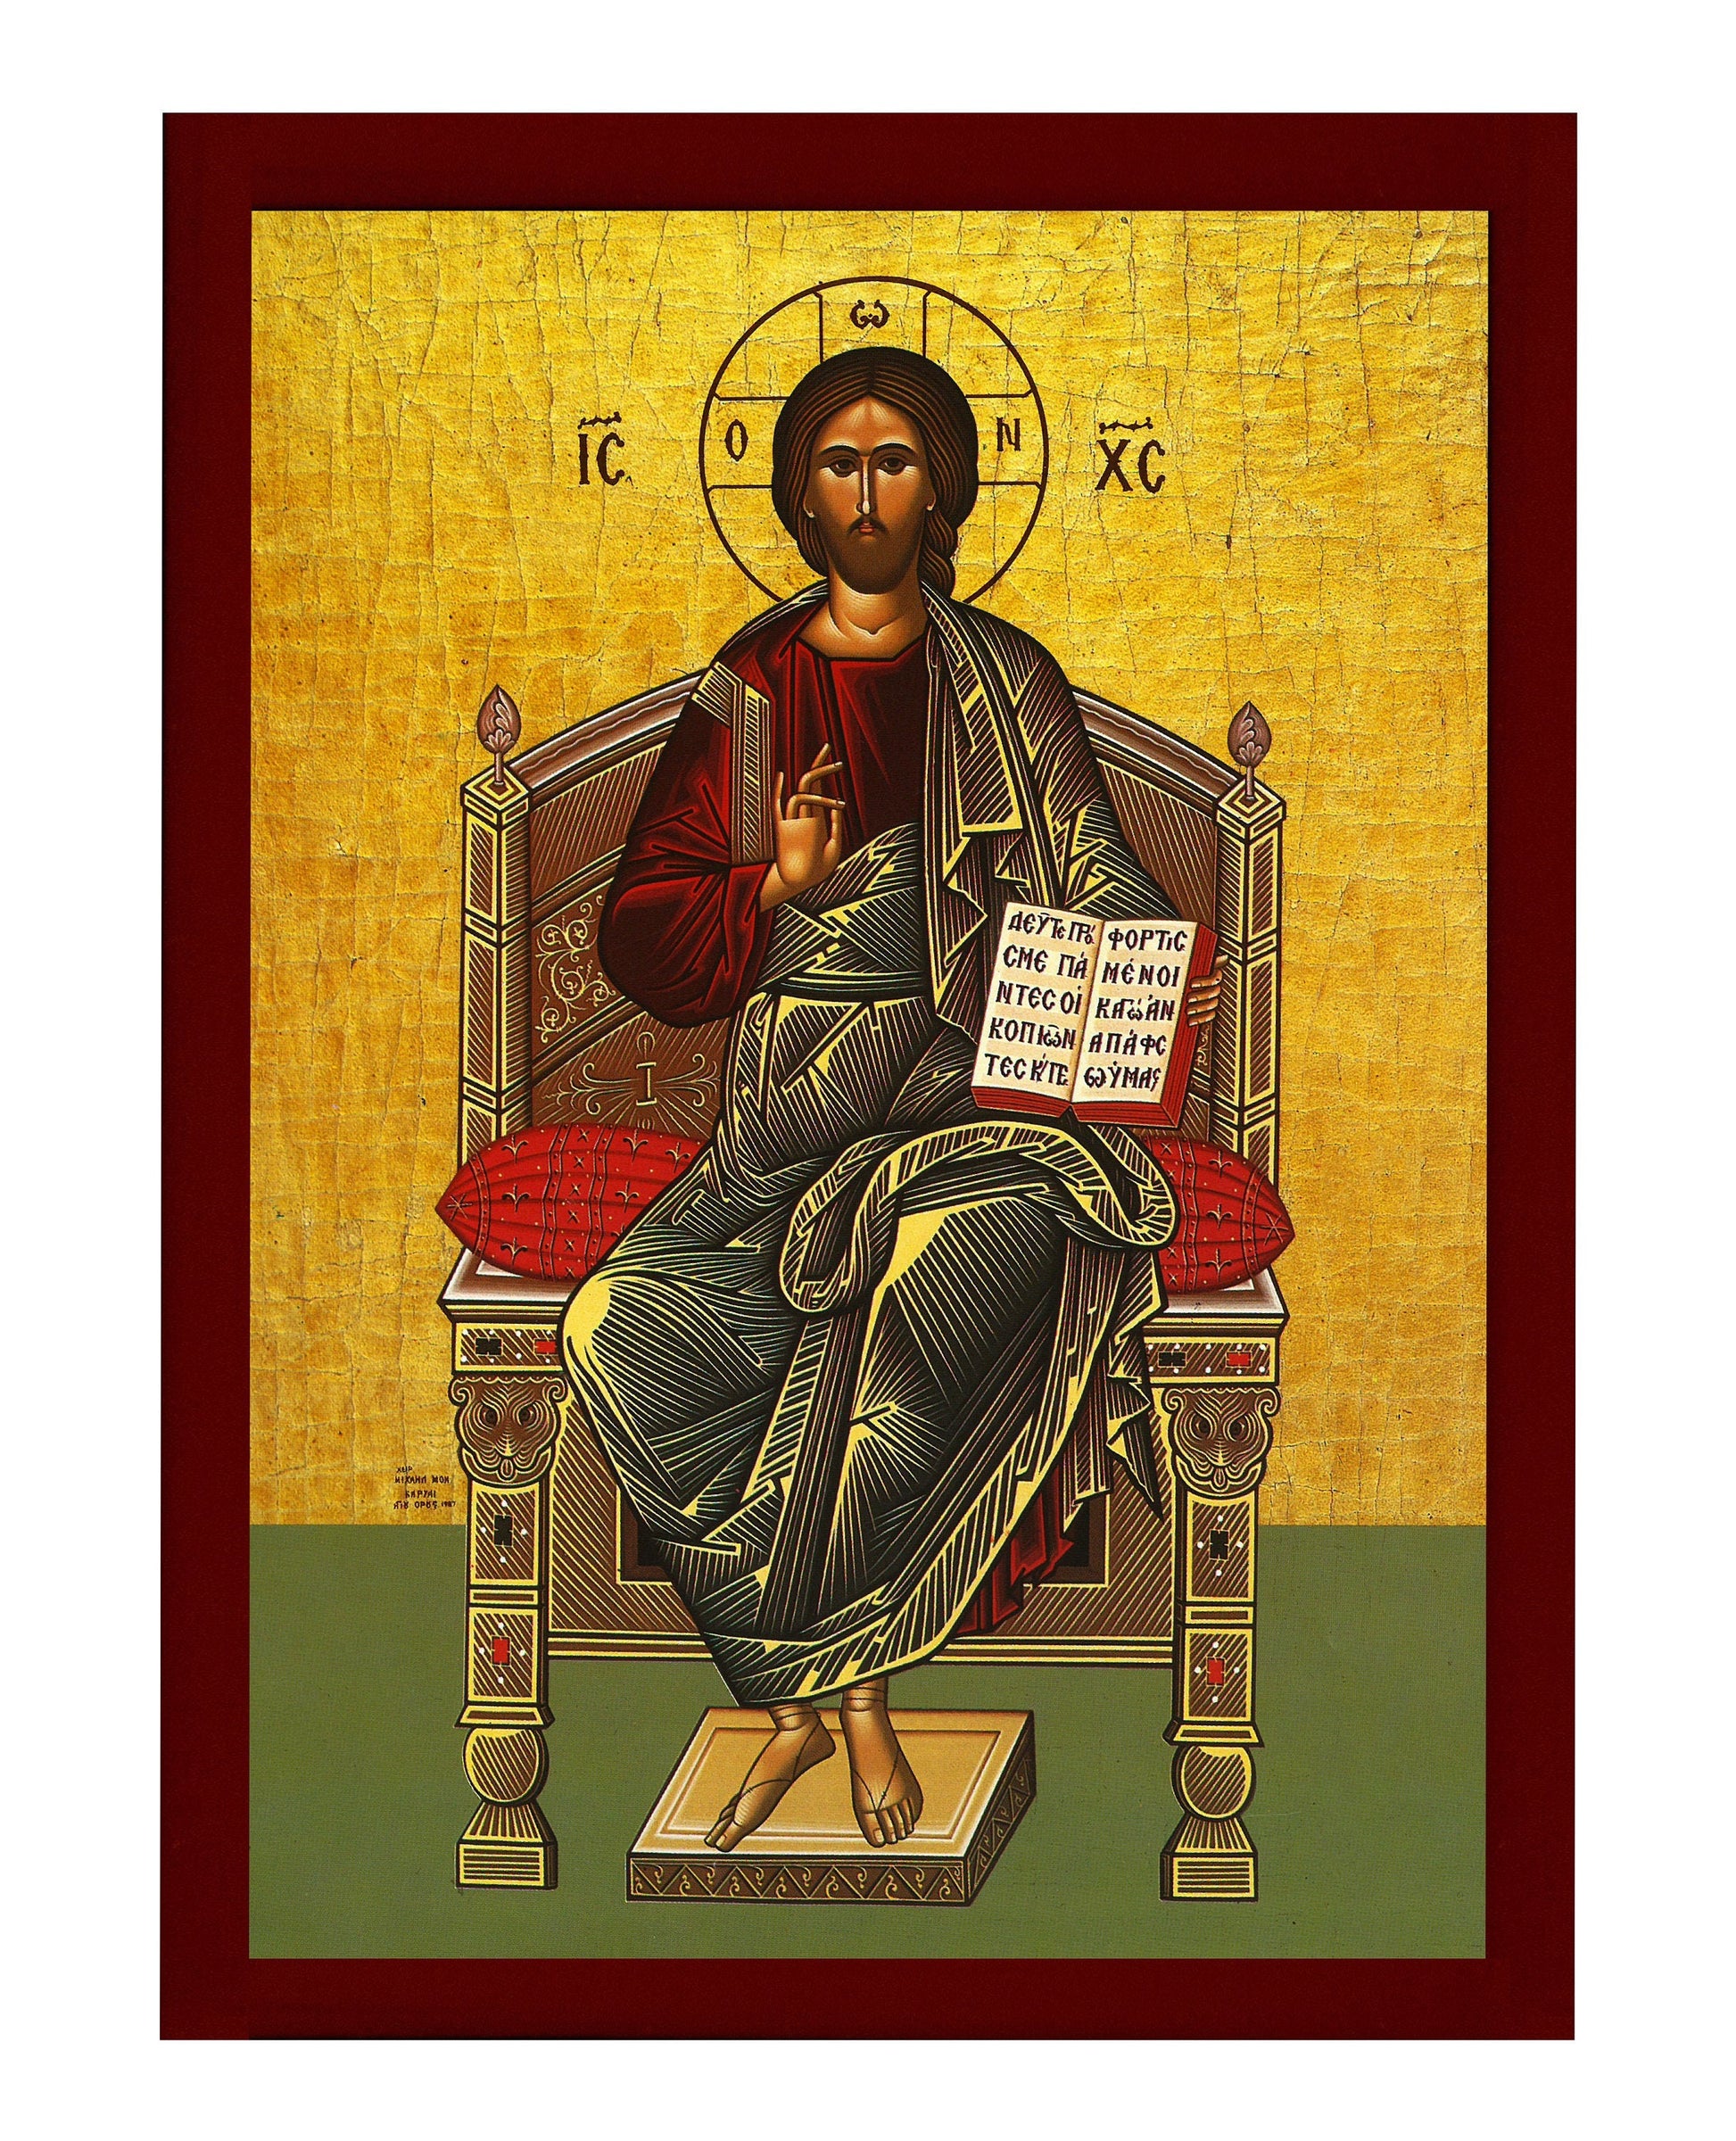 Jesus Christ icon Enthroned, Handmade Greek Orthodox icon of our Lord, Byzantine art wall hanging on wood plaque, religious icon home decor TheHolyArt